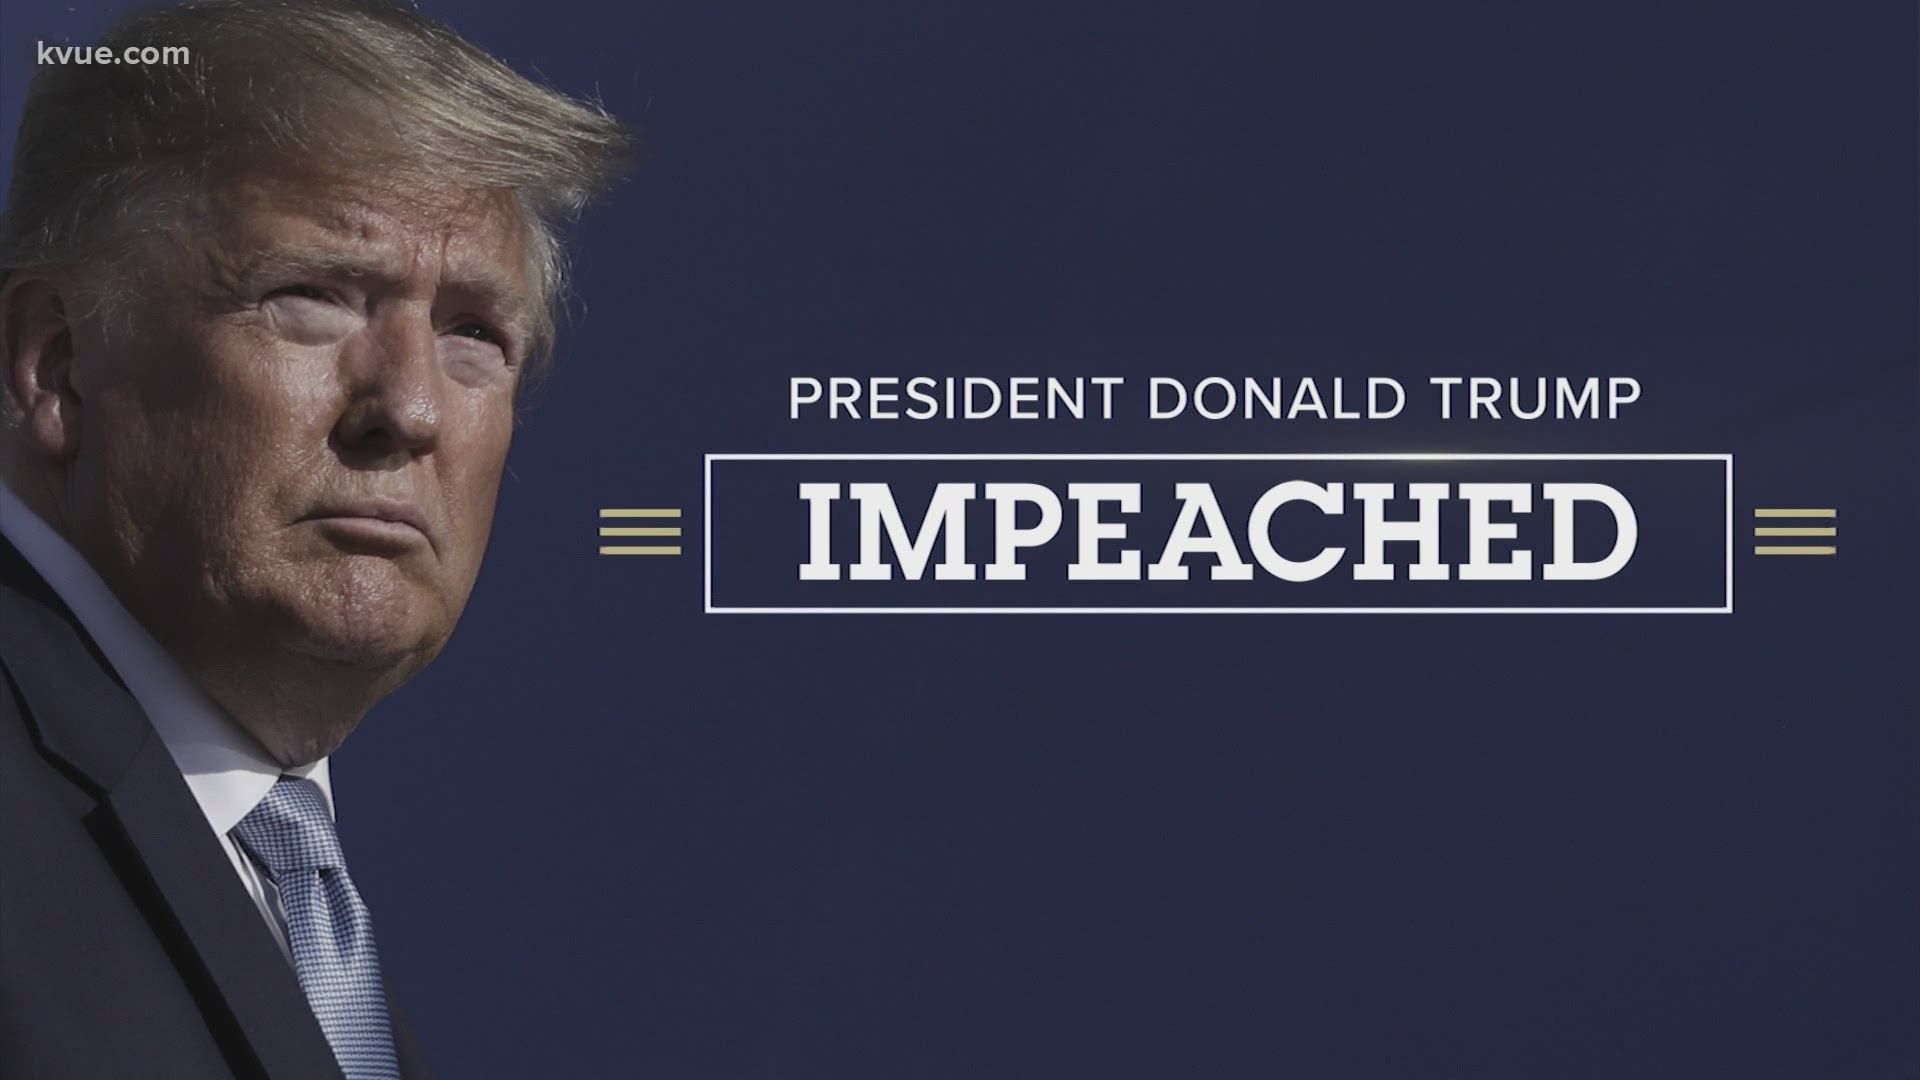 Former President Donald Trump's second impeachment trial will begin Tuesday.